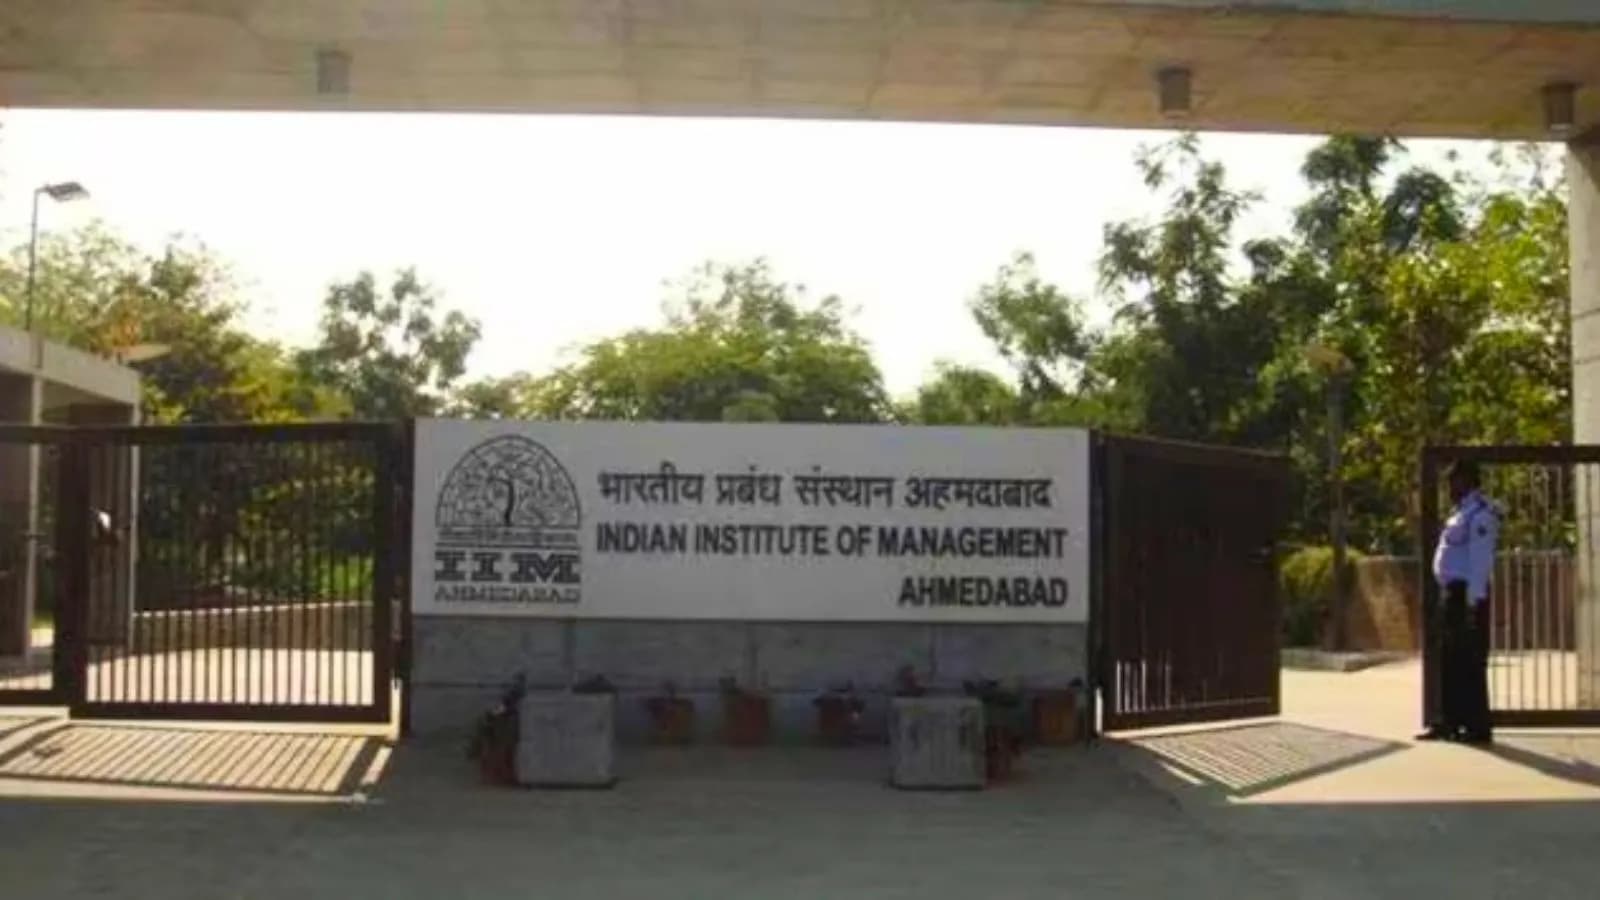 IIM Ahmedabad Placements: A total of 28 firms participated from diverse sectors such as technology, banking, finance, consulting, analytics, etc. in the second phase.